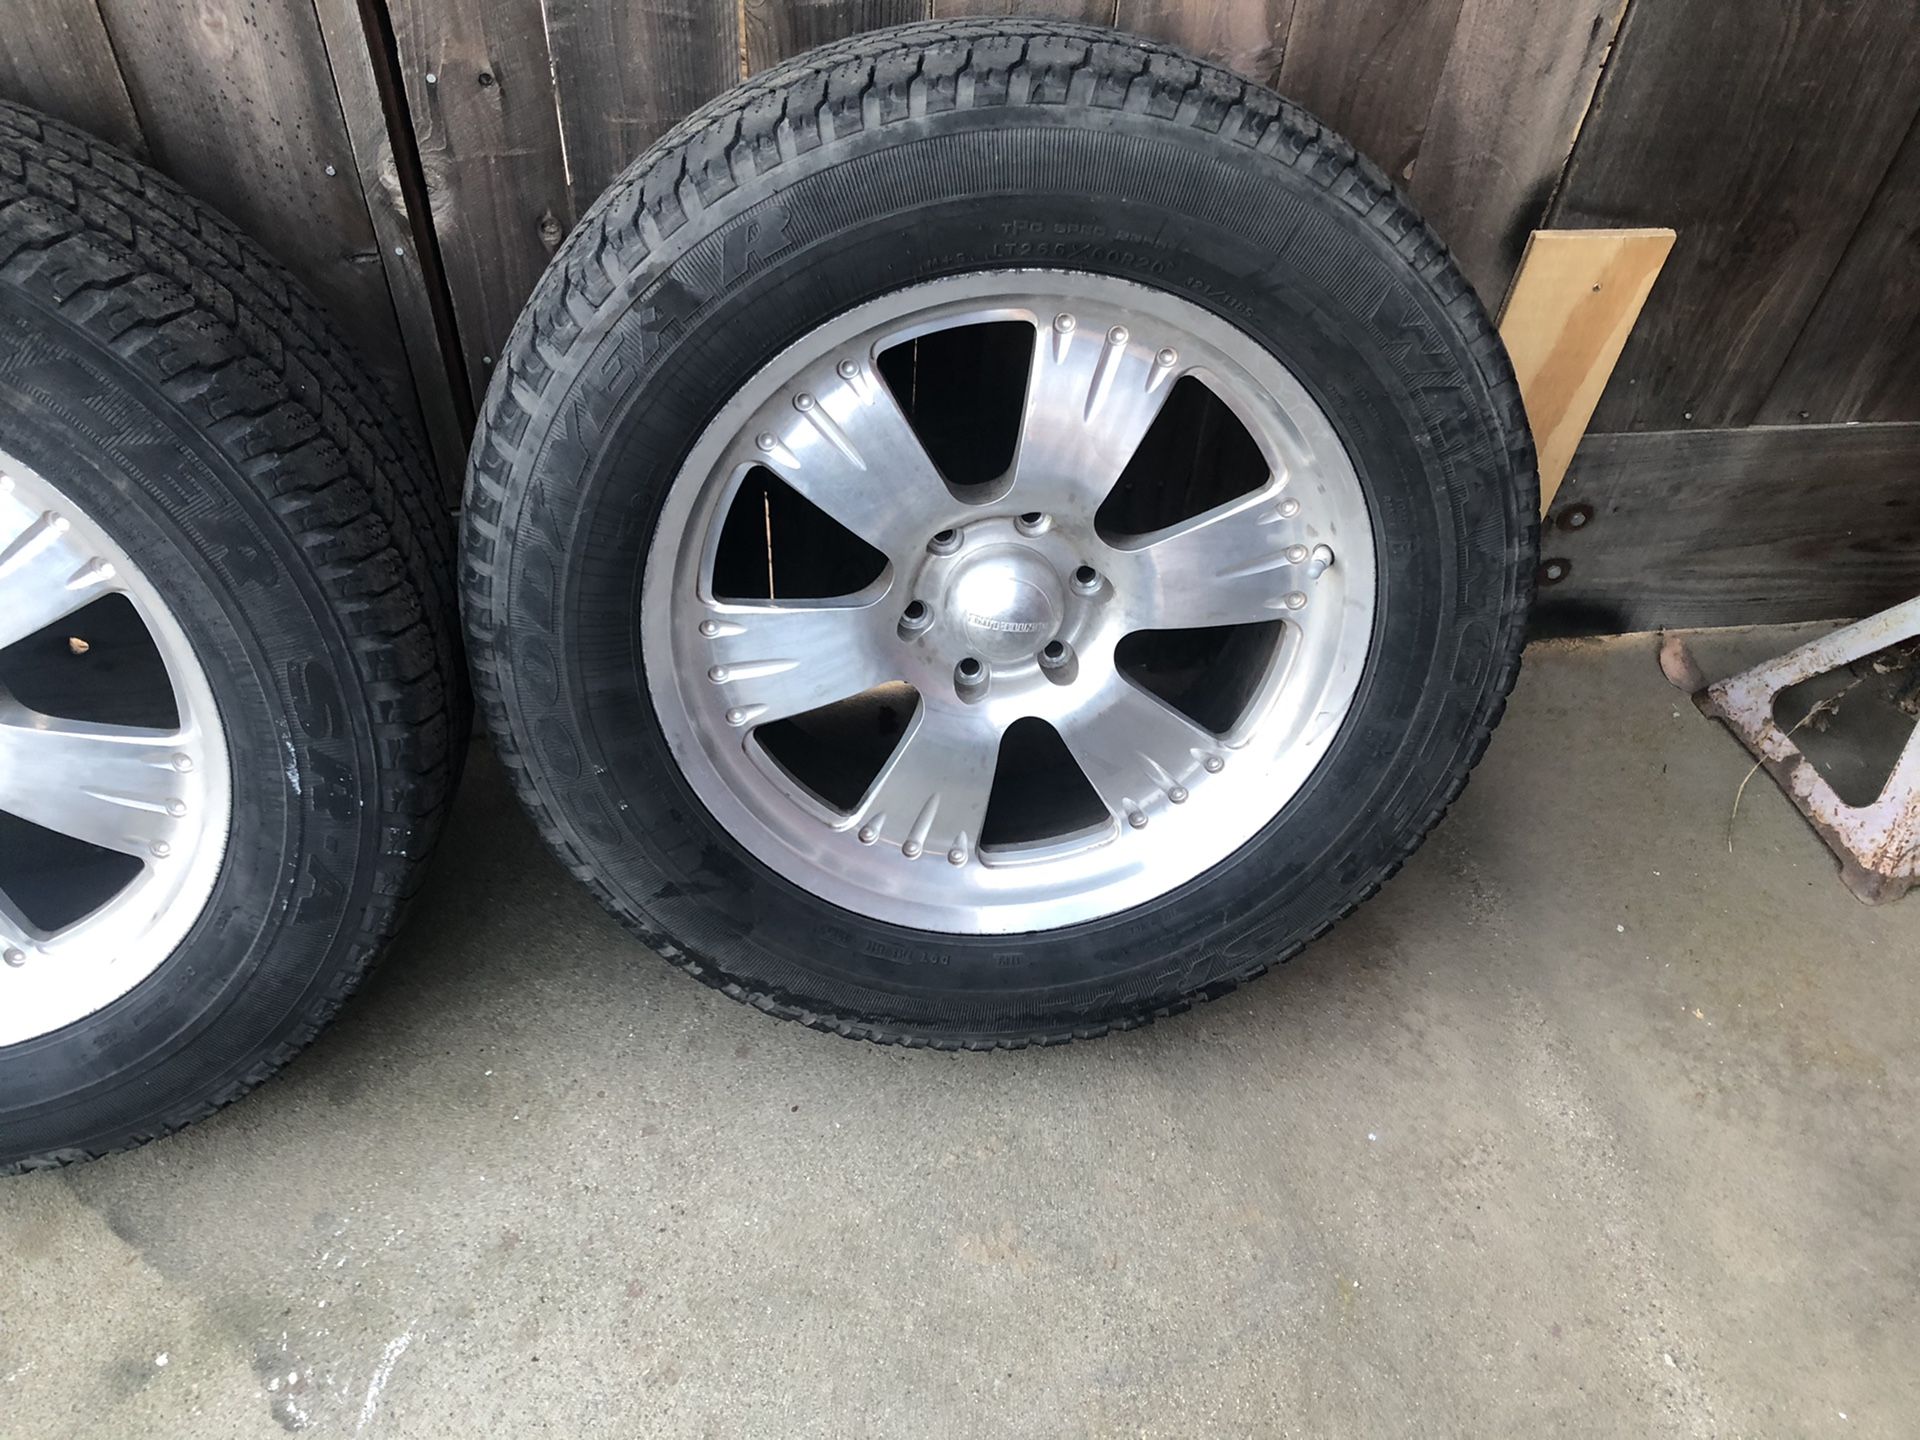 Four Centerline Wheels for sale, 20 inches, 50% life. $300